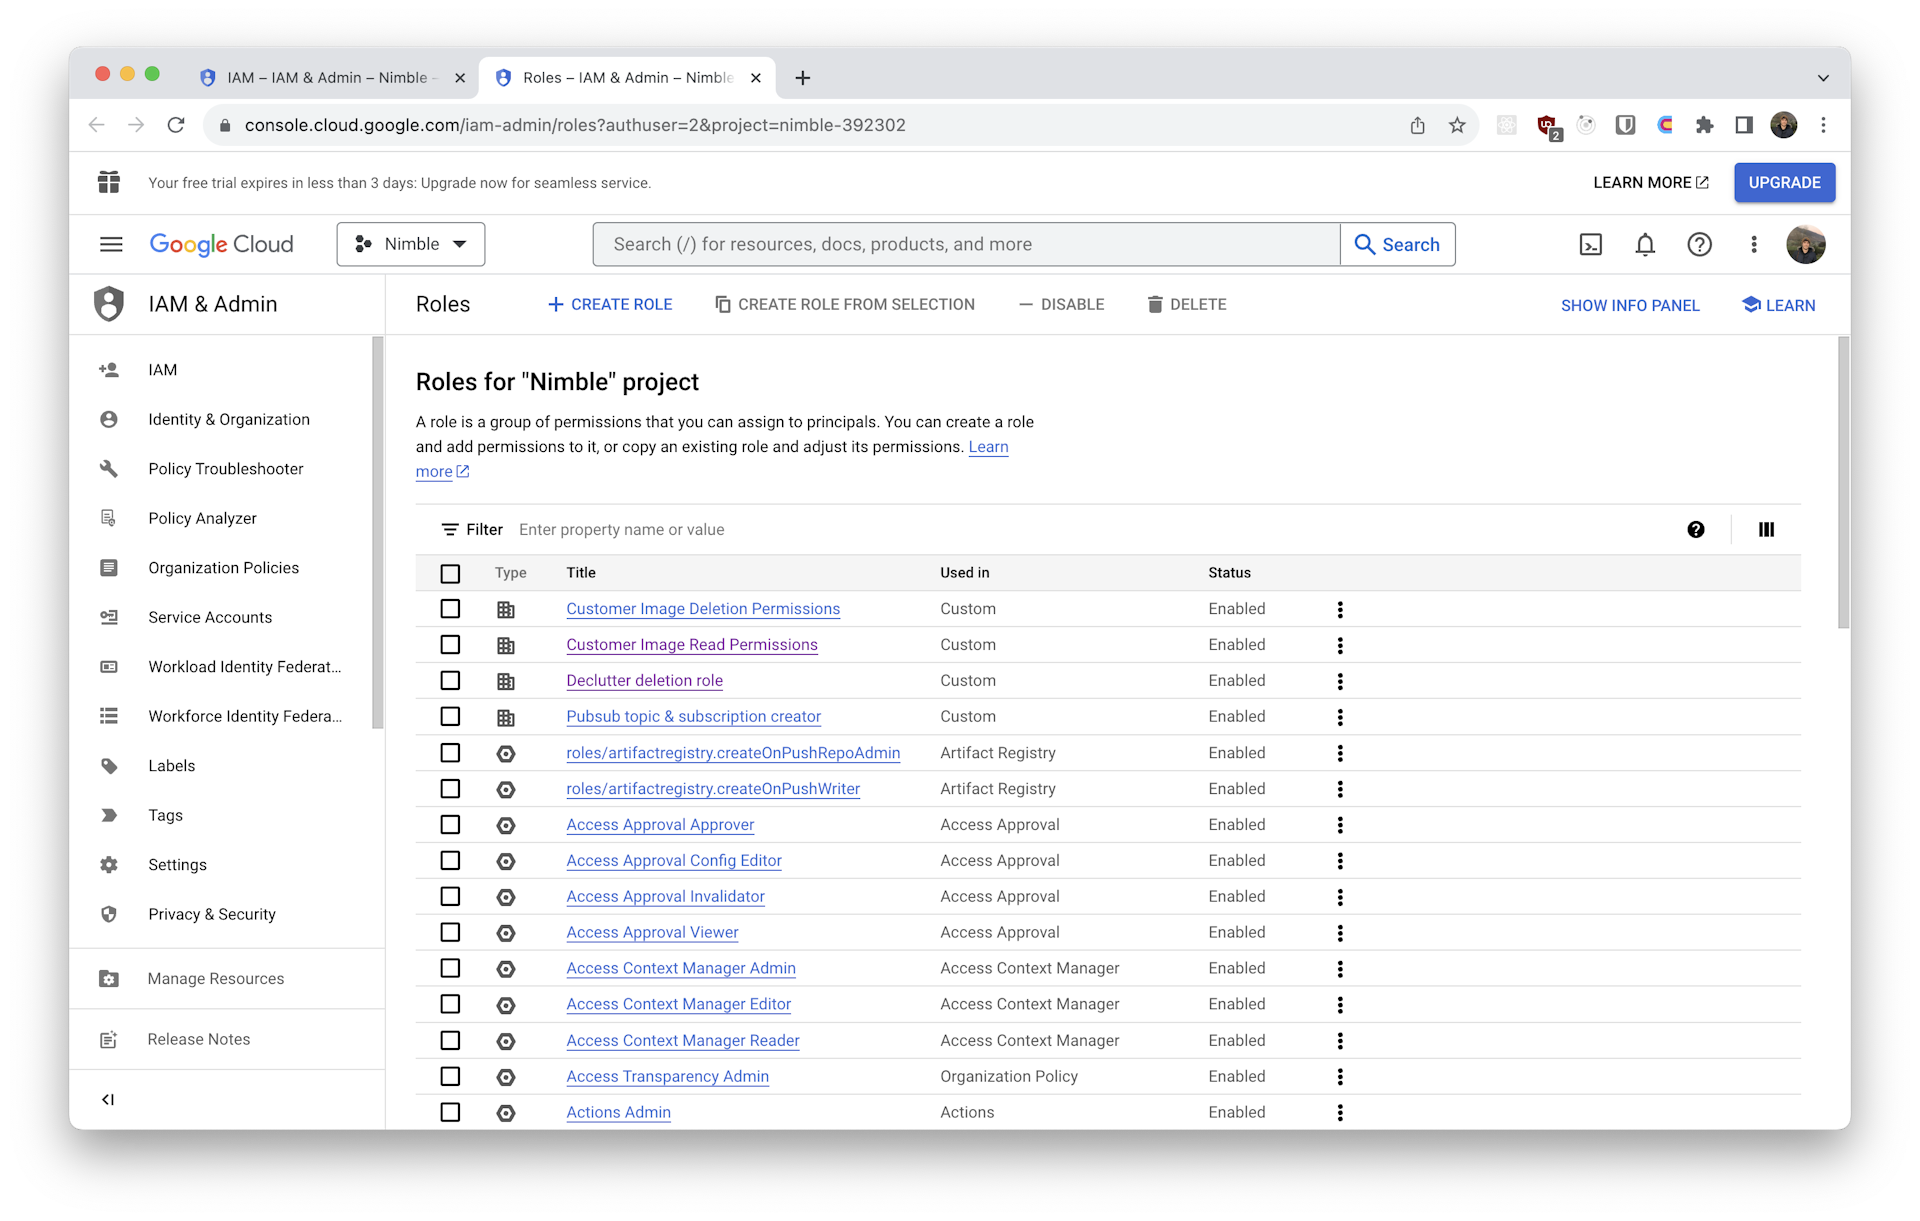 Screenshot of the Google Cloud Console showing Roles subsection of the IAM & Admin section.